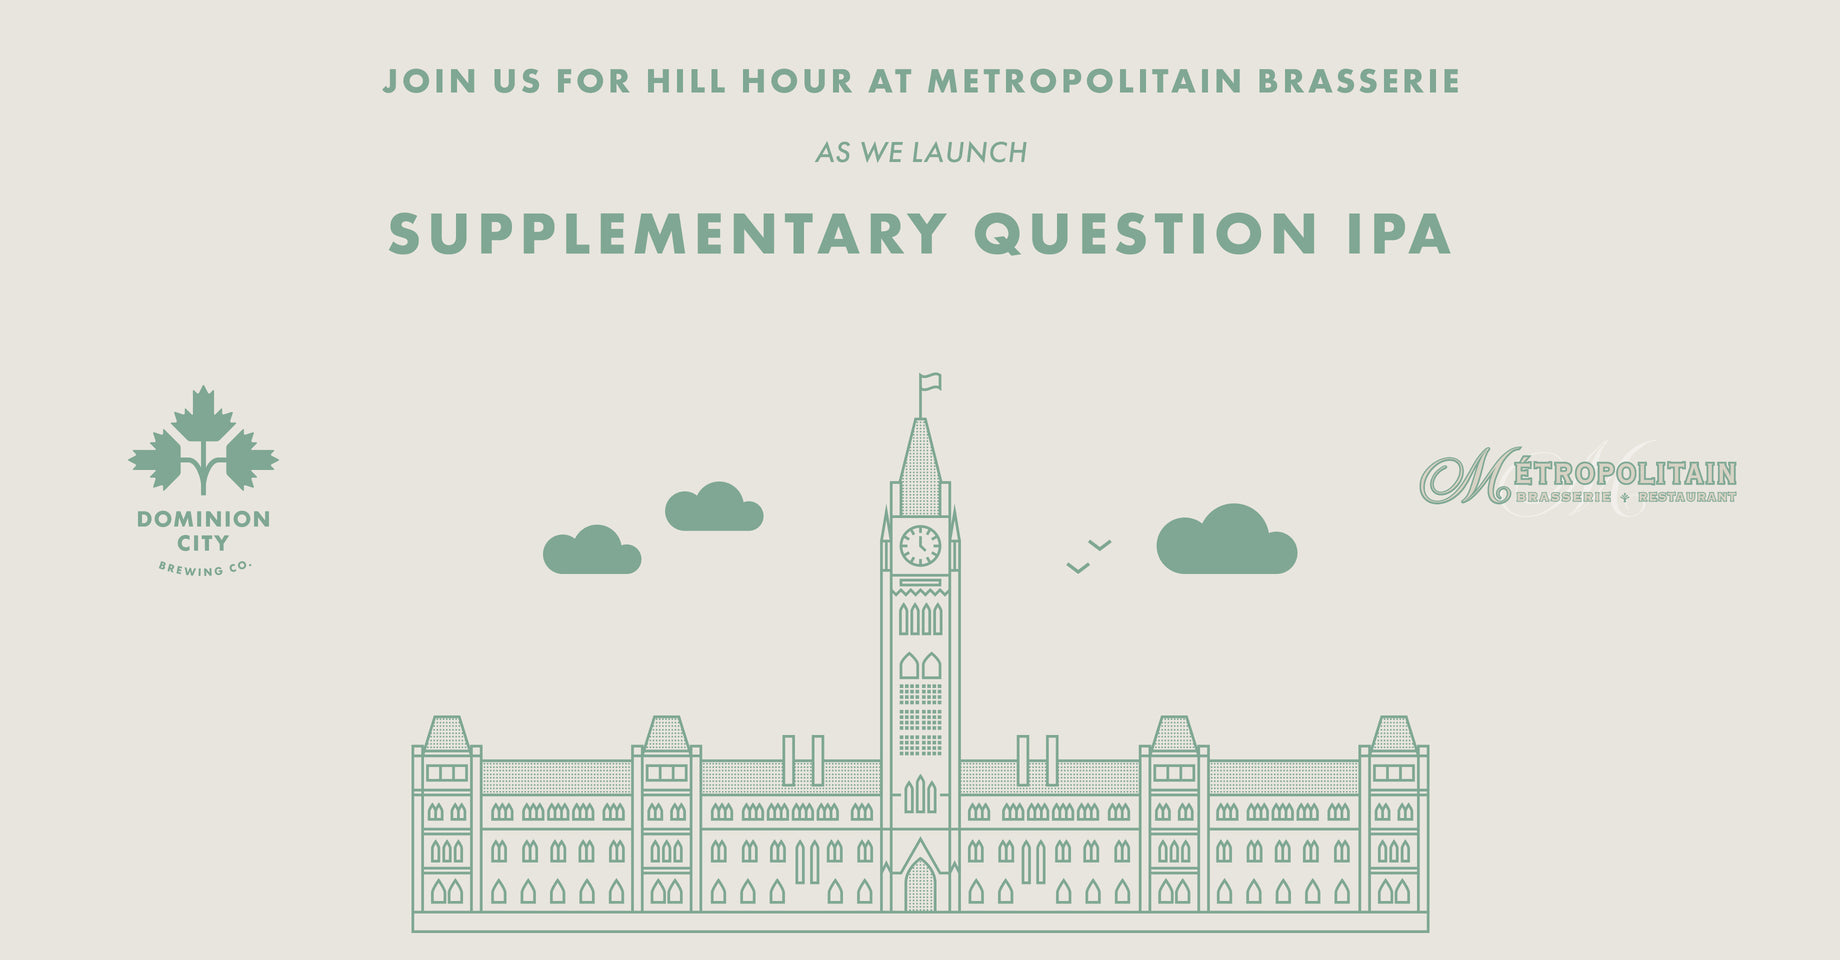 Join us for Hill Hour at Metropolitain Brasserie!